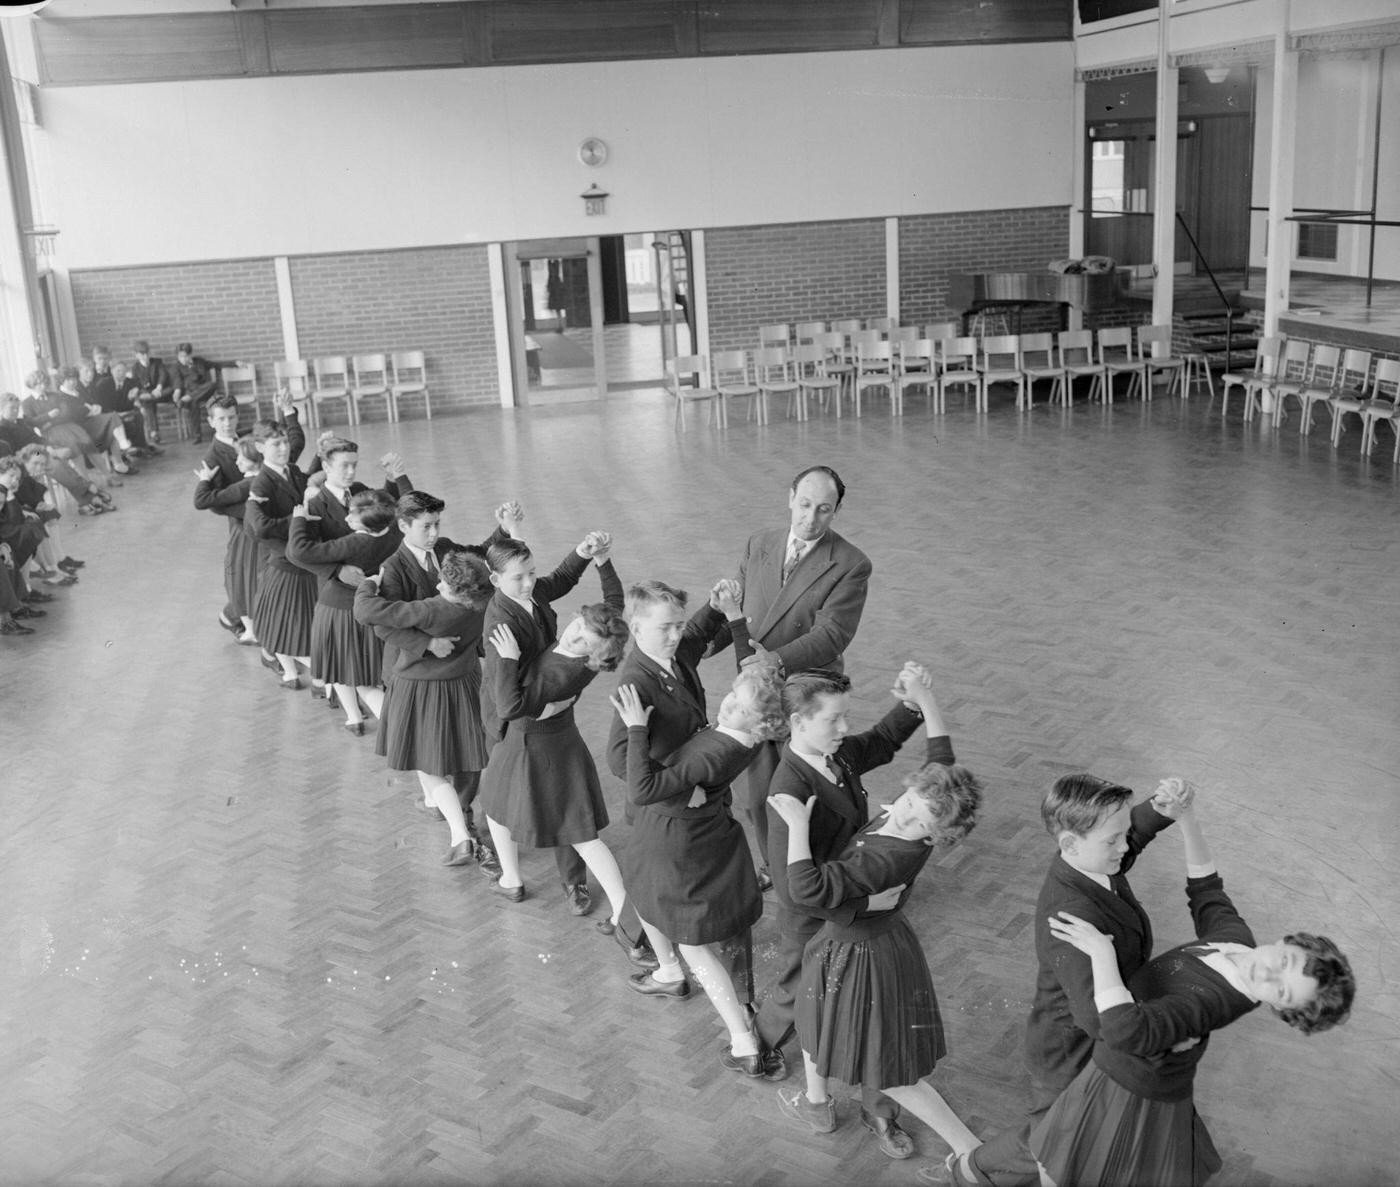 Dance teacher Sidney Winter instructing a line of young formation dancers at the Holmshill Secondary School in Boreham Wood, Hertfordshire.